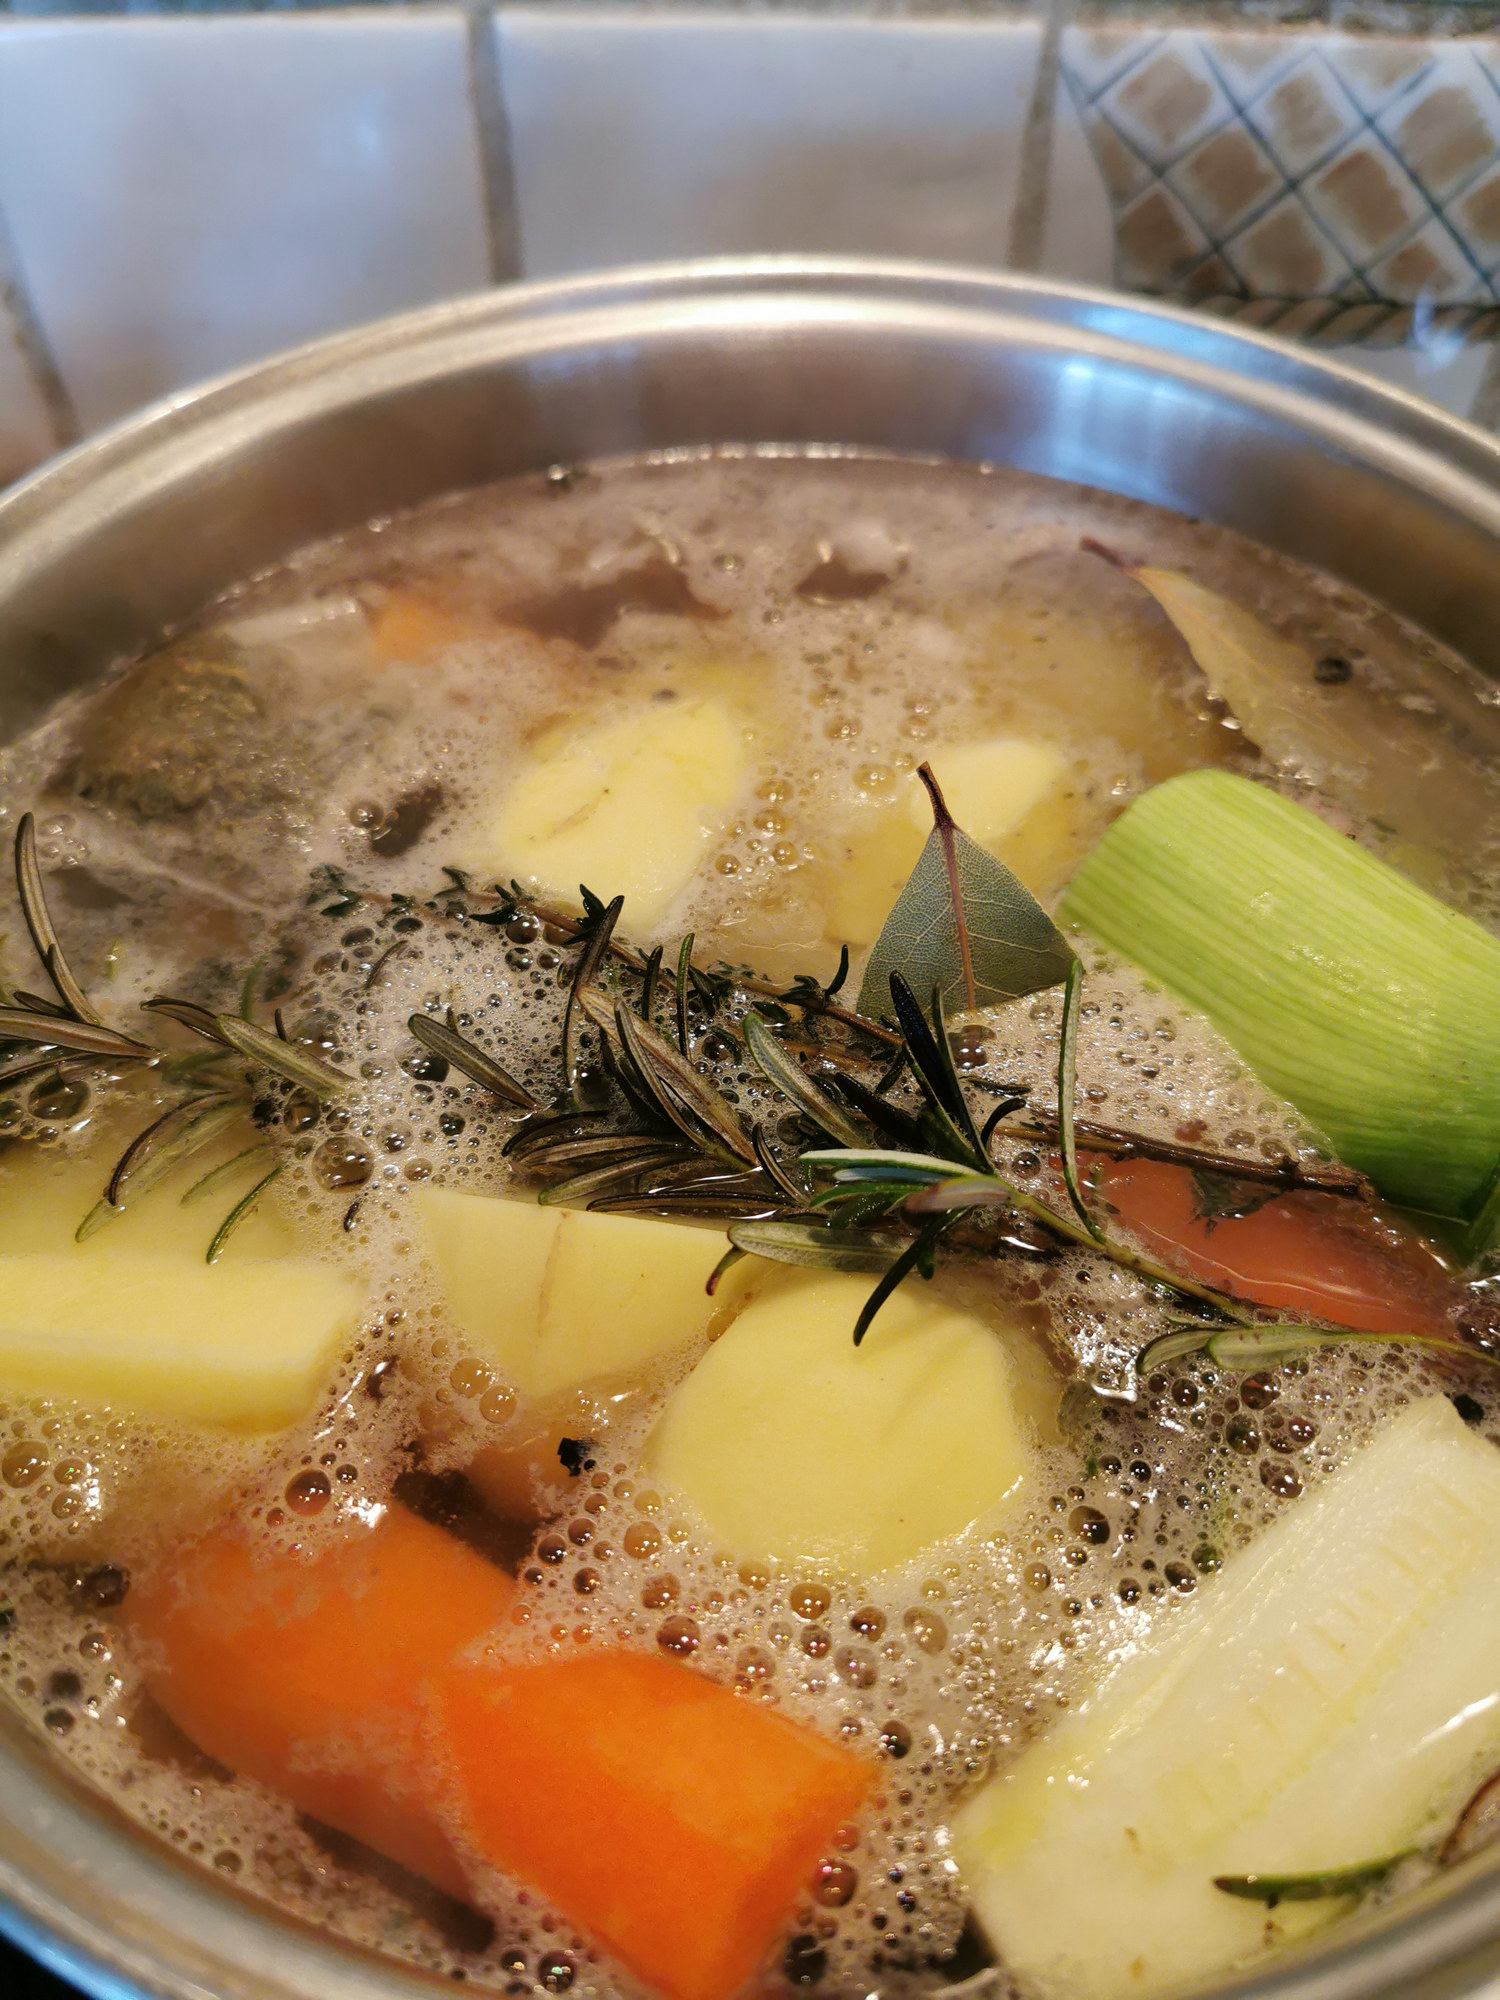 Vegetable stock in a pot.